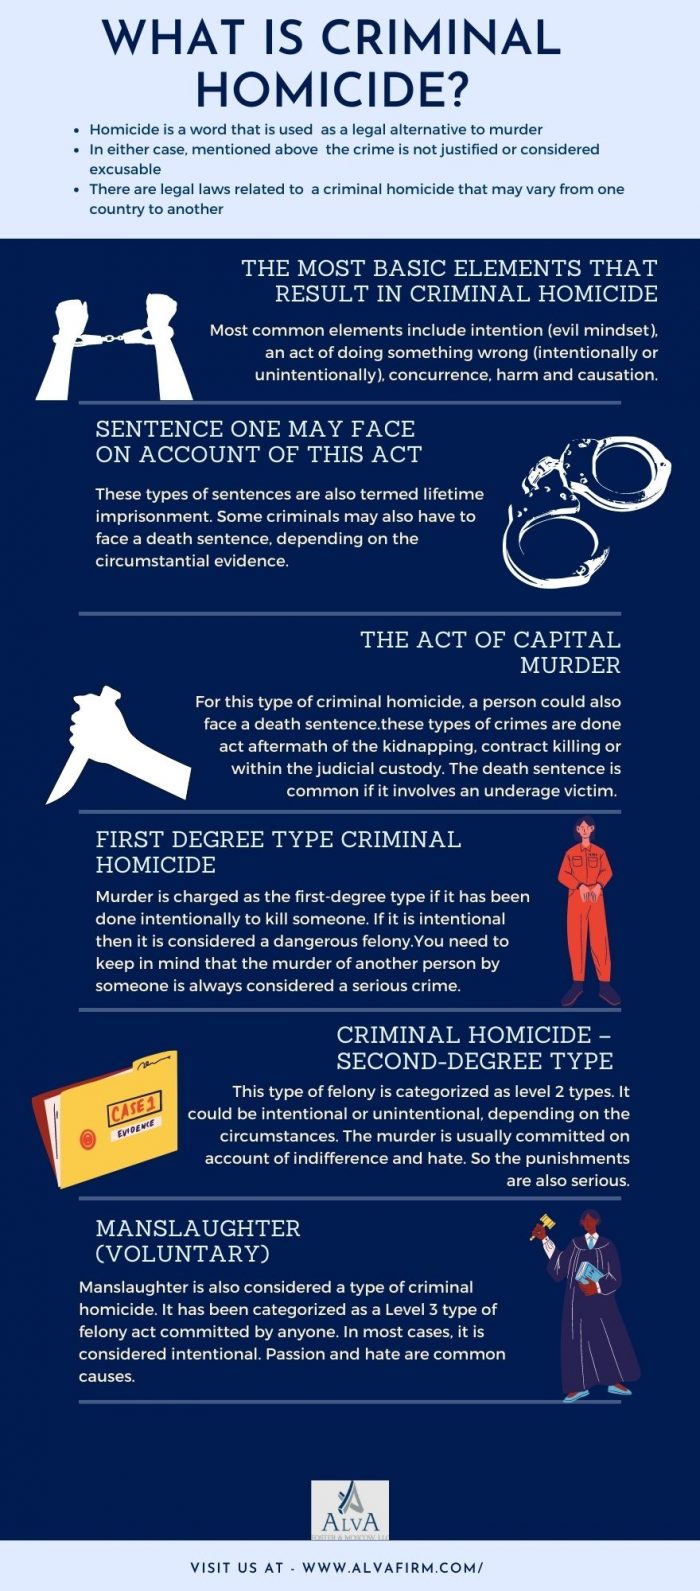 What Is Criminal Homicide?